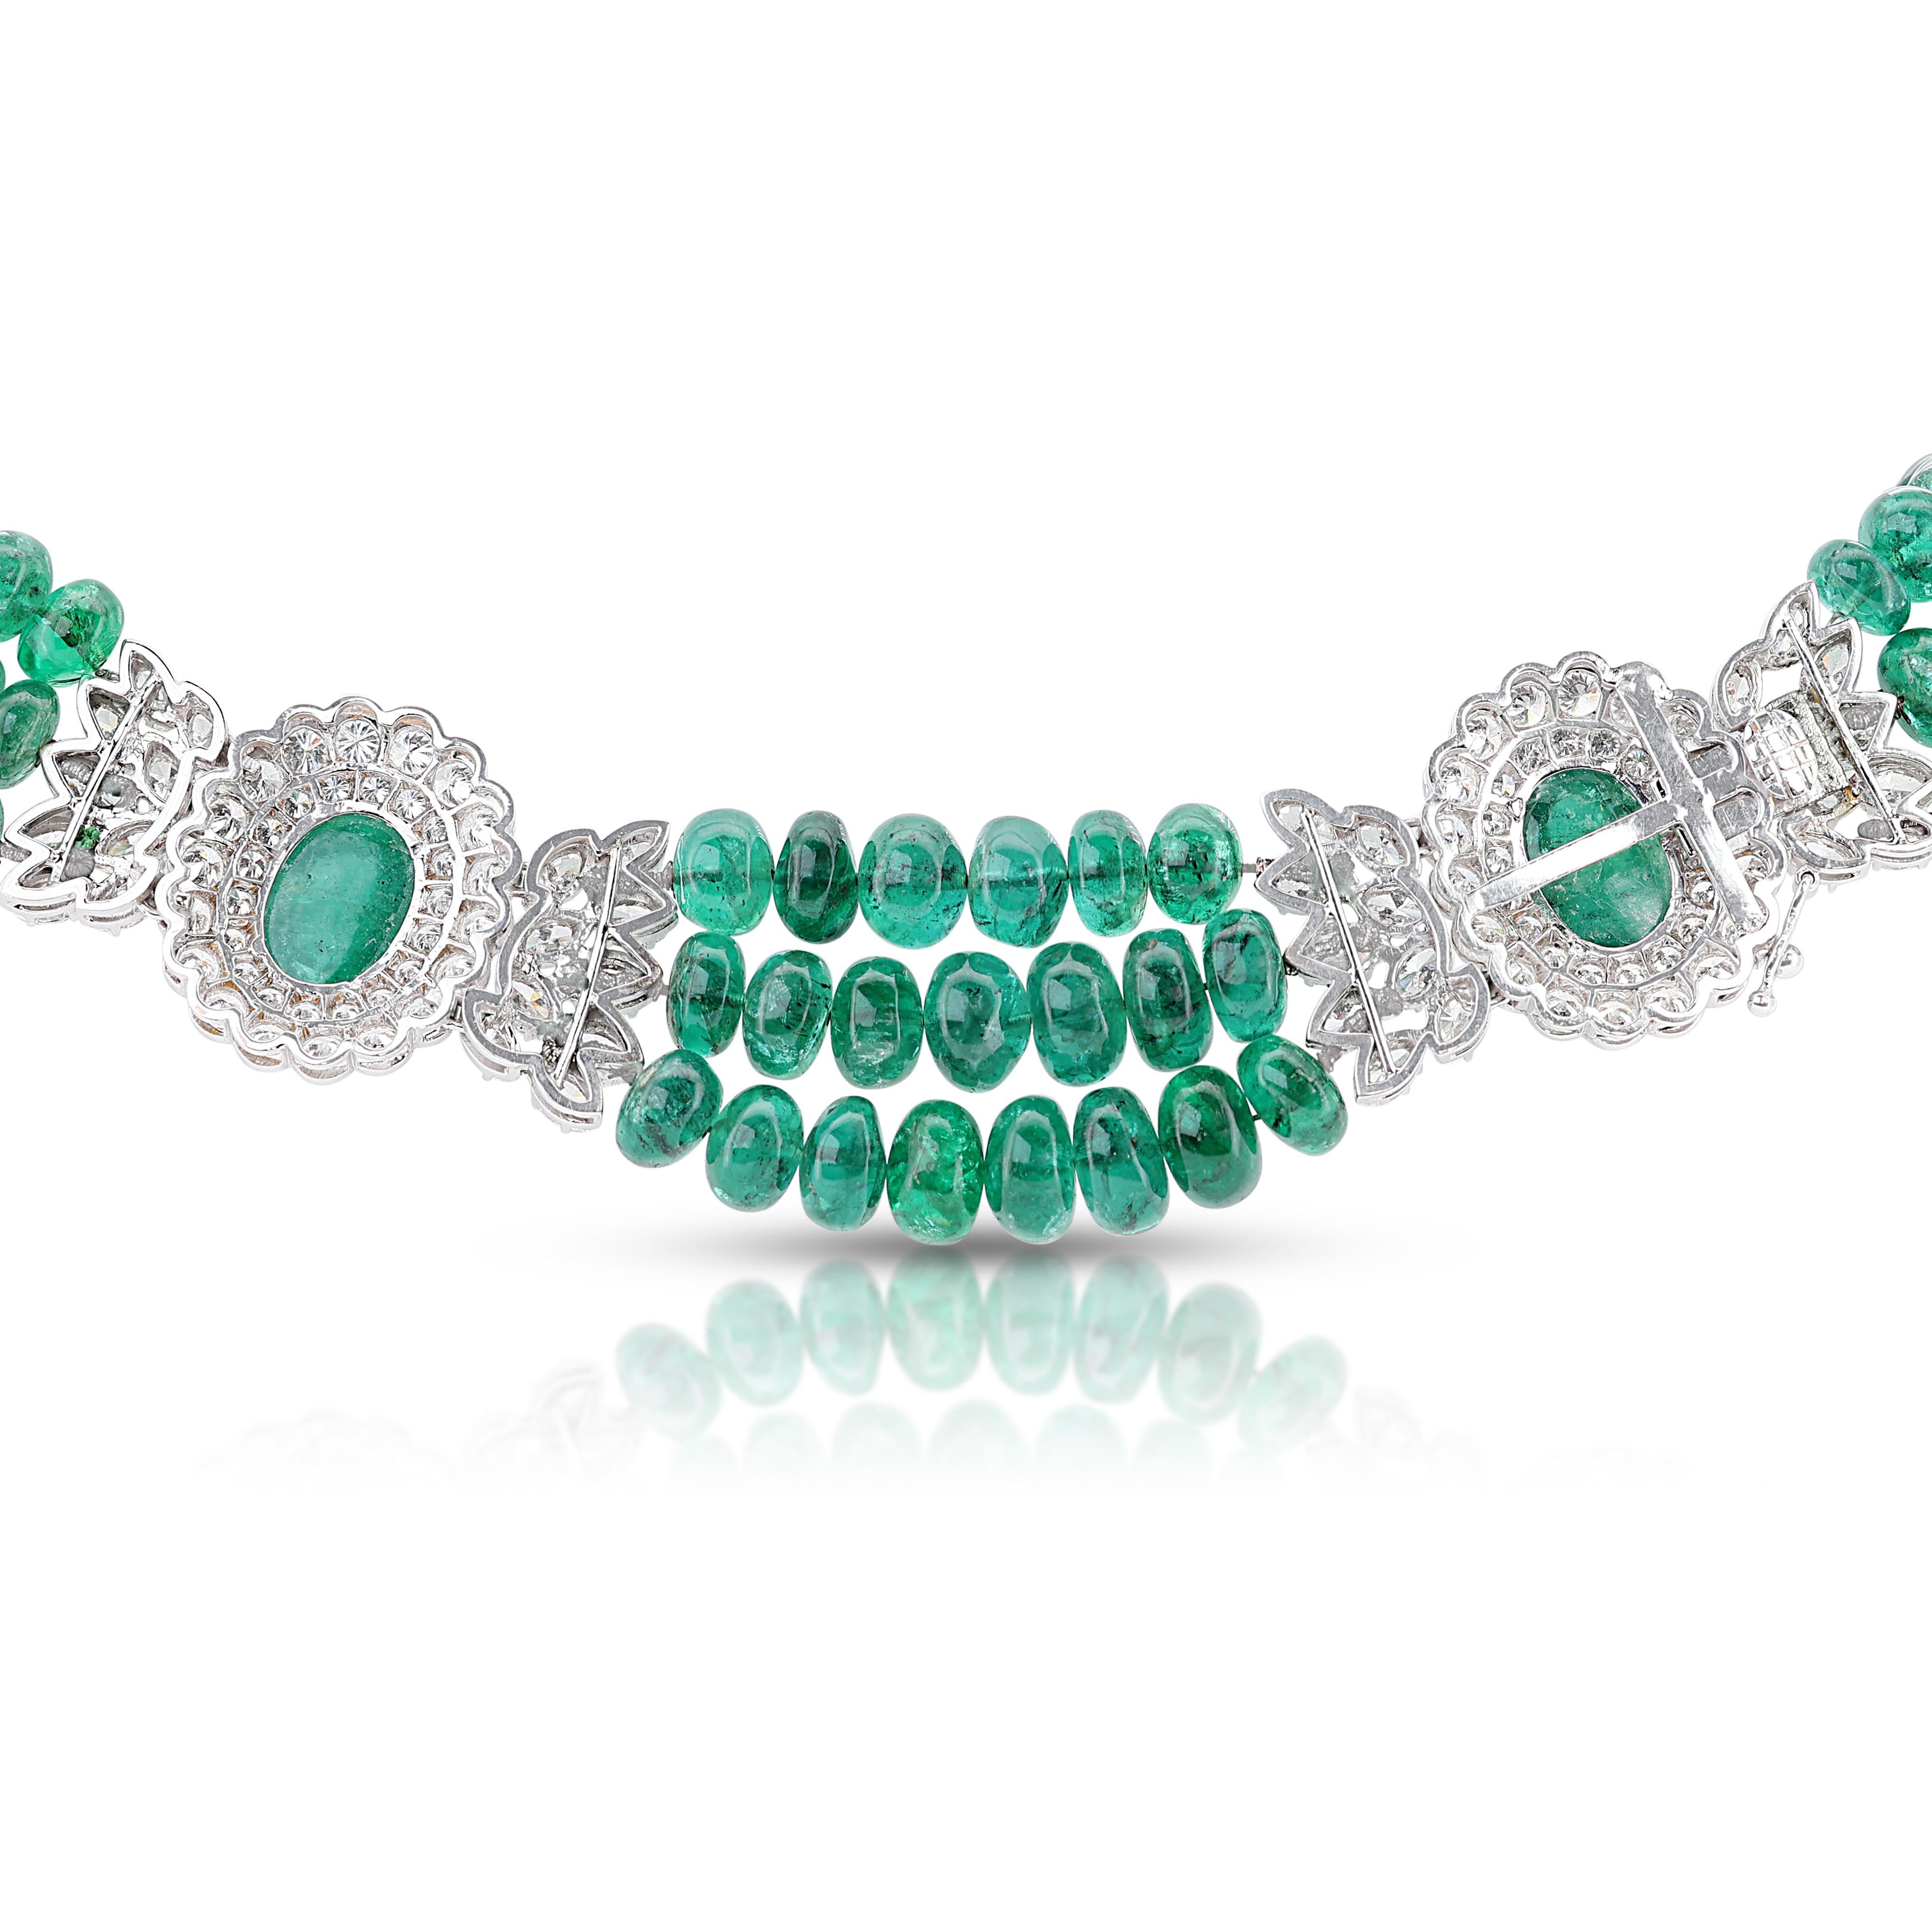 Enchanting 146.85ct Emerald Collar Necklace with Diamonds in 18K White Gold  For Sale 1